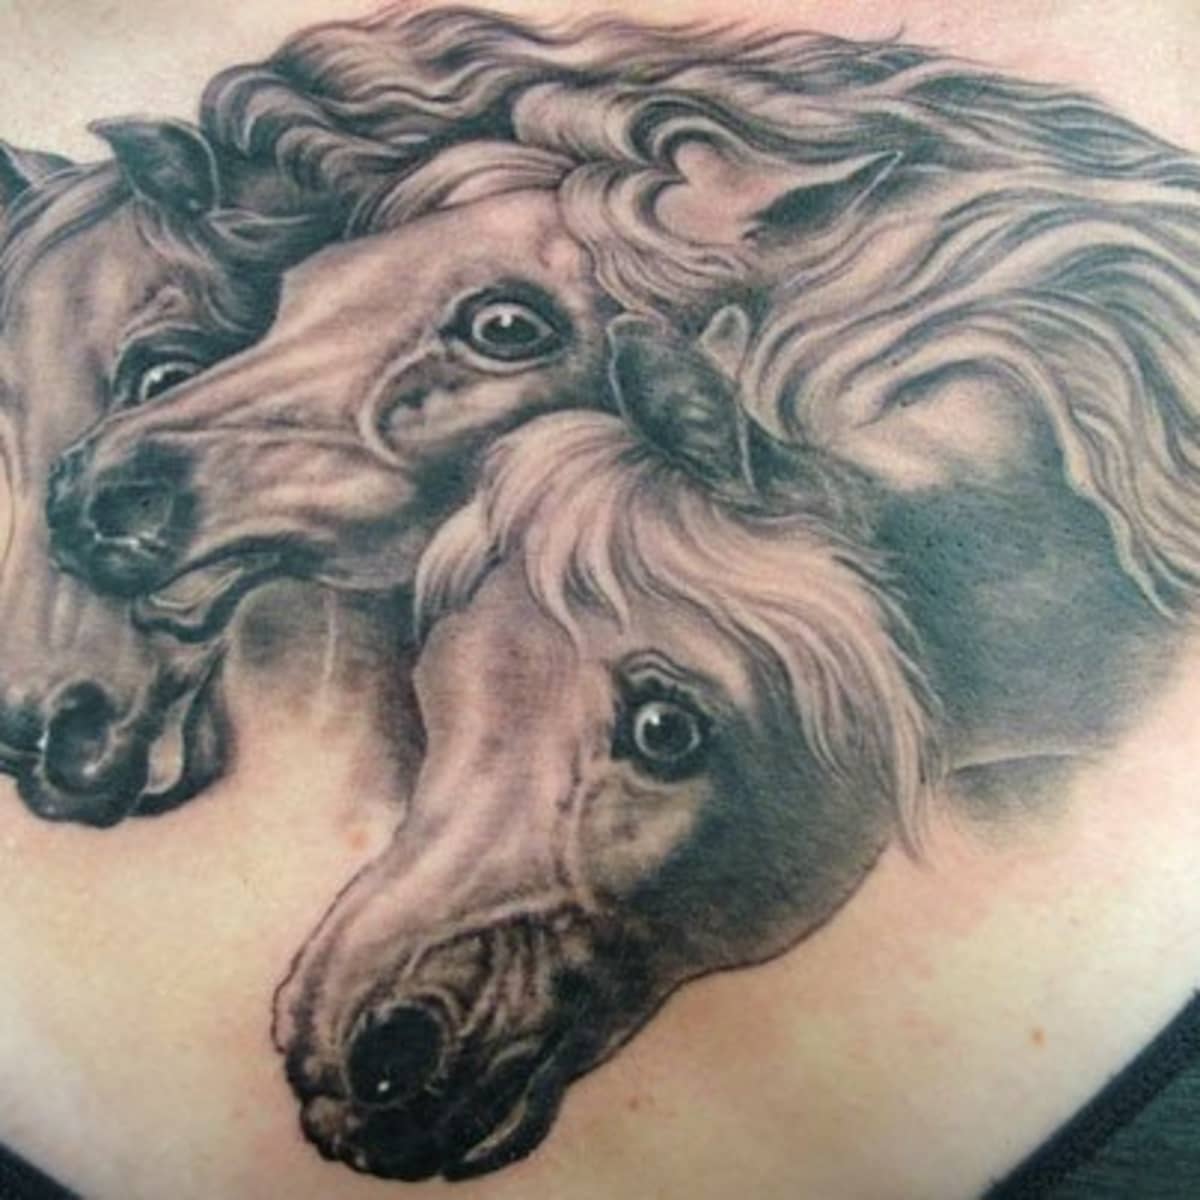 Horse Tattoo Design Ideas - HubPages